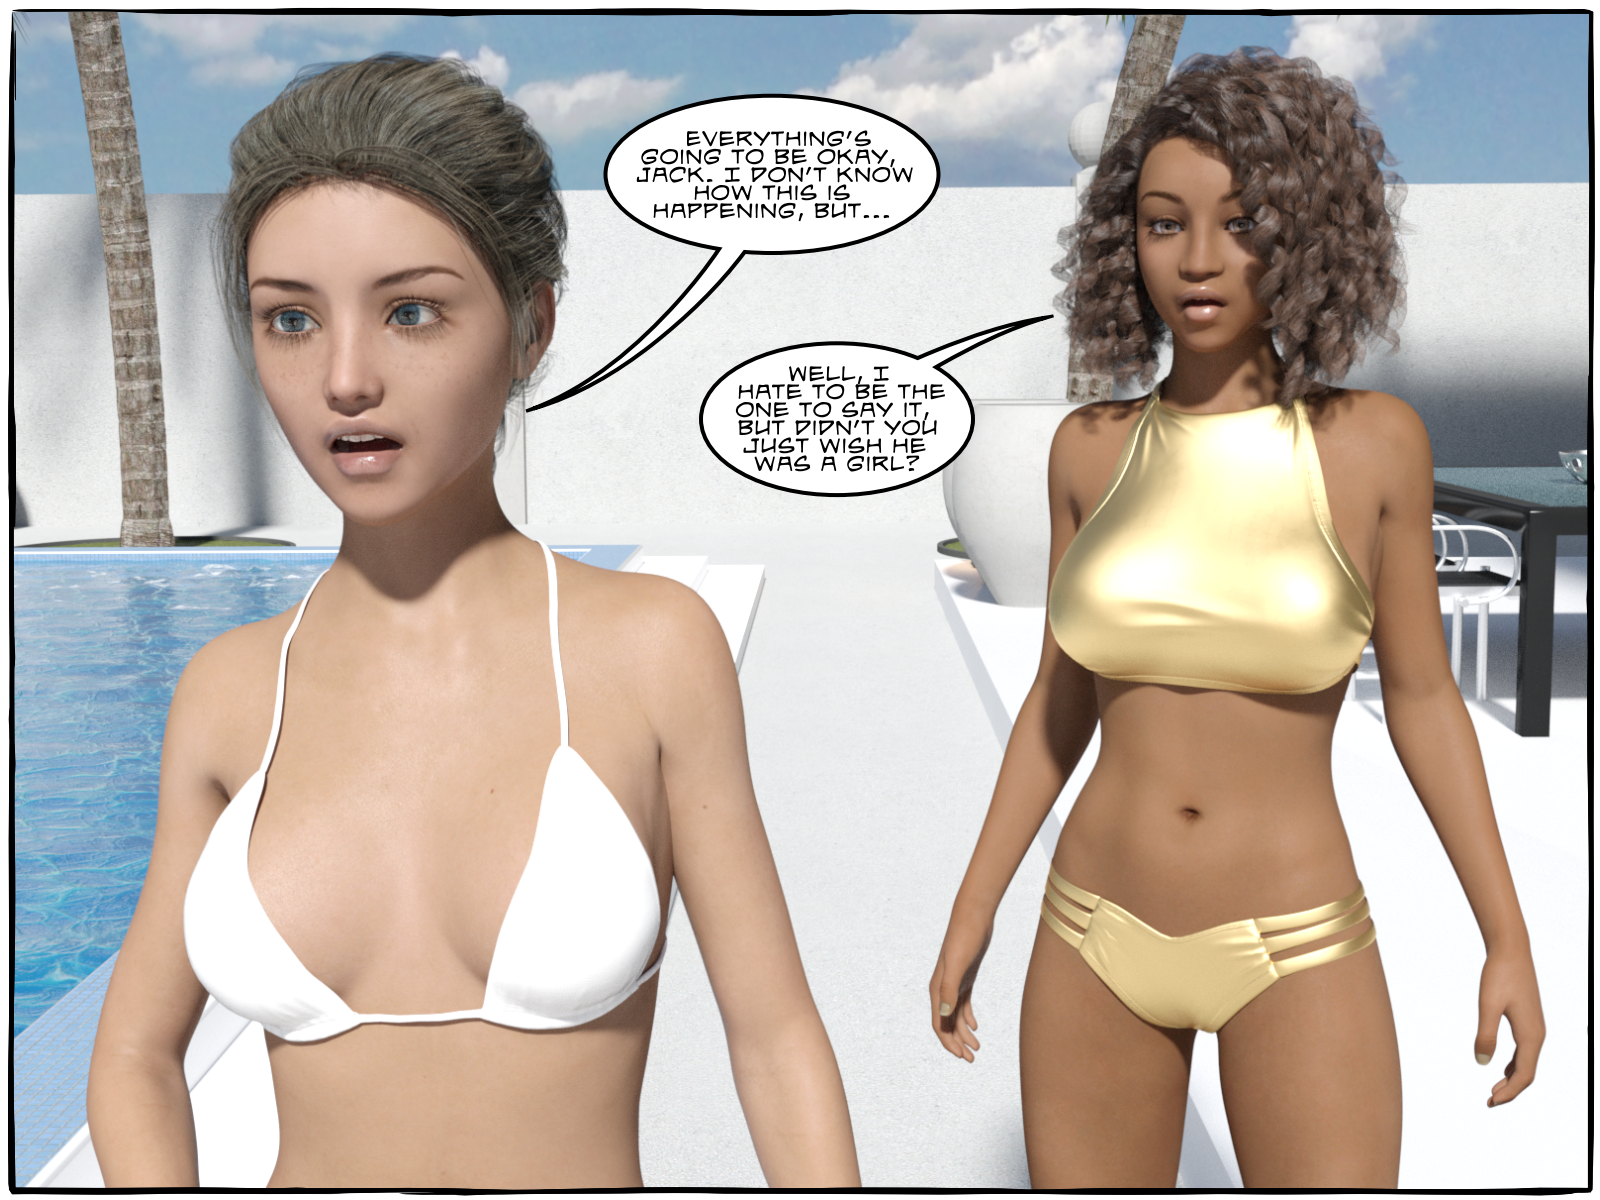 summer_sisters_021_by_tgtrinity_dcklbz8.png